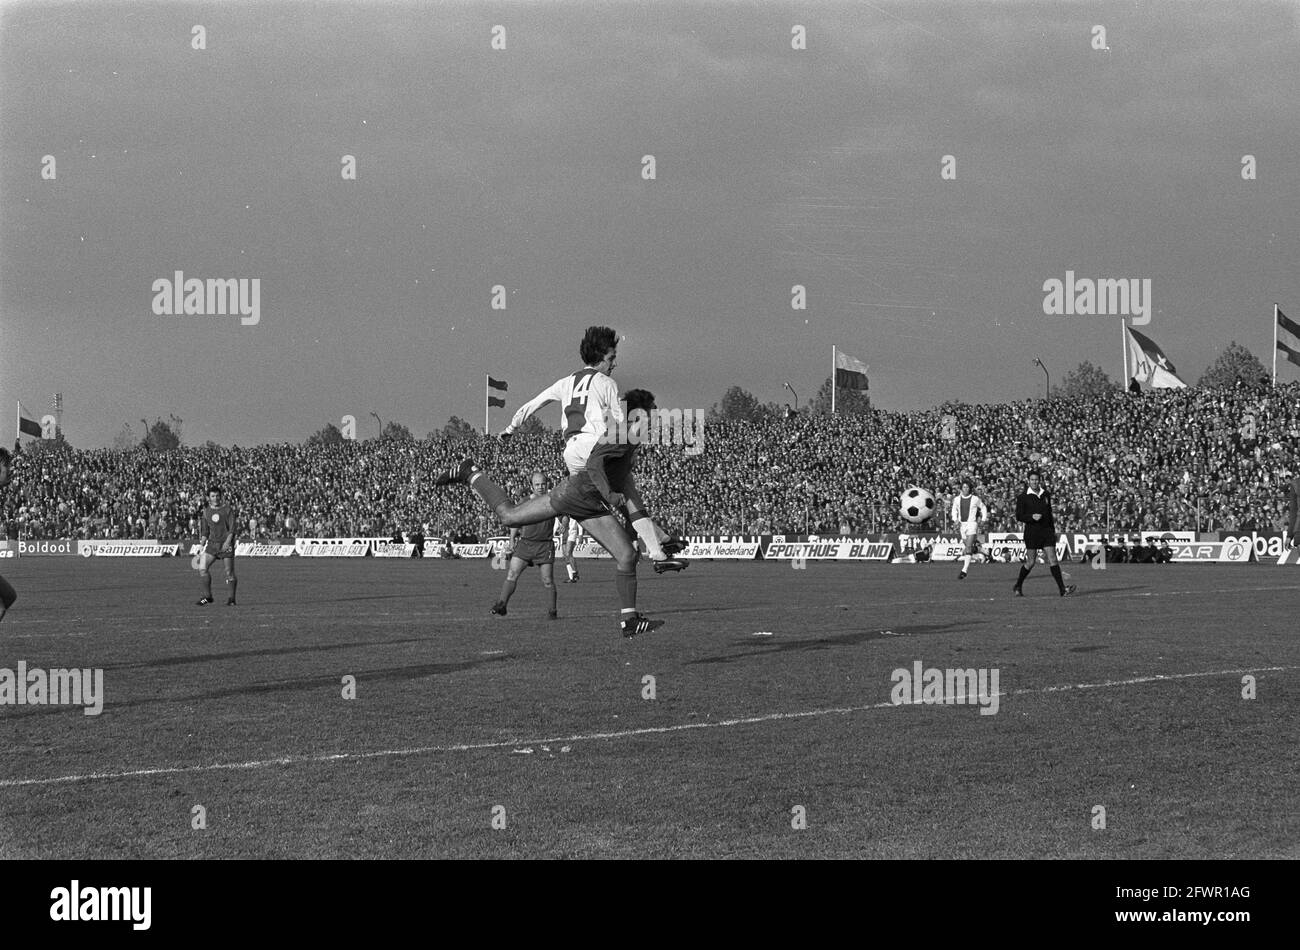 MVV against Ajax 3-0, action, 31 October 1971, sports, soccer, The Netherlands, 20th century press agency photo, news to remember, documentary, historic photography 1945-1990, visual stories, human history of the Twentieth Century, capturing moments in time Stock Photo